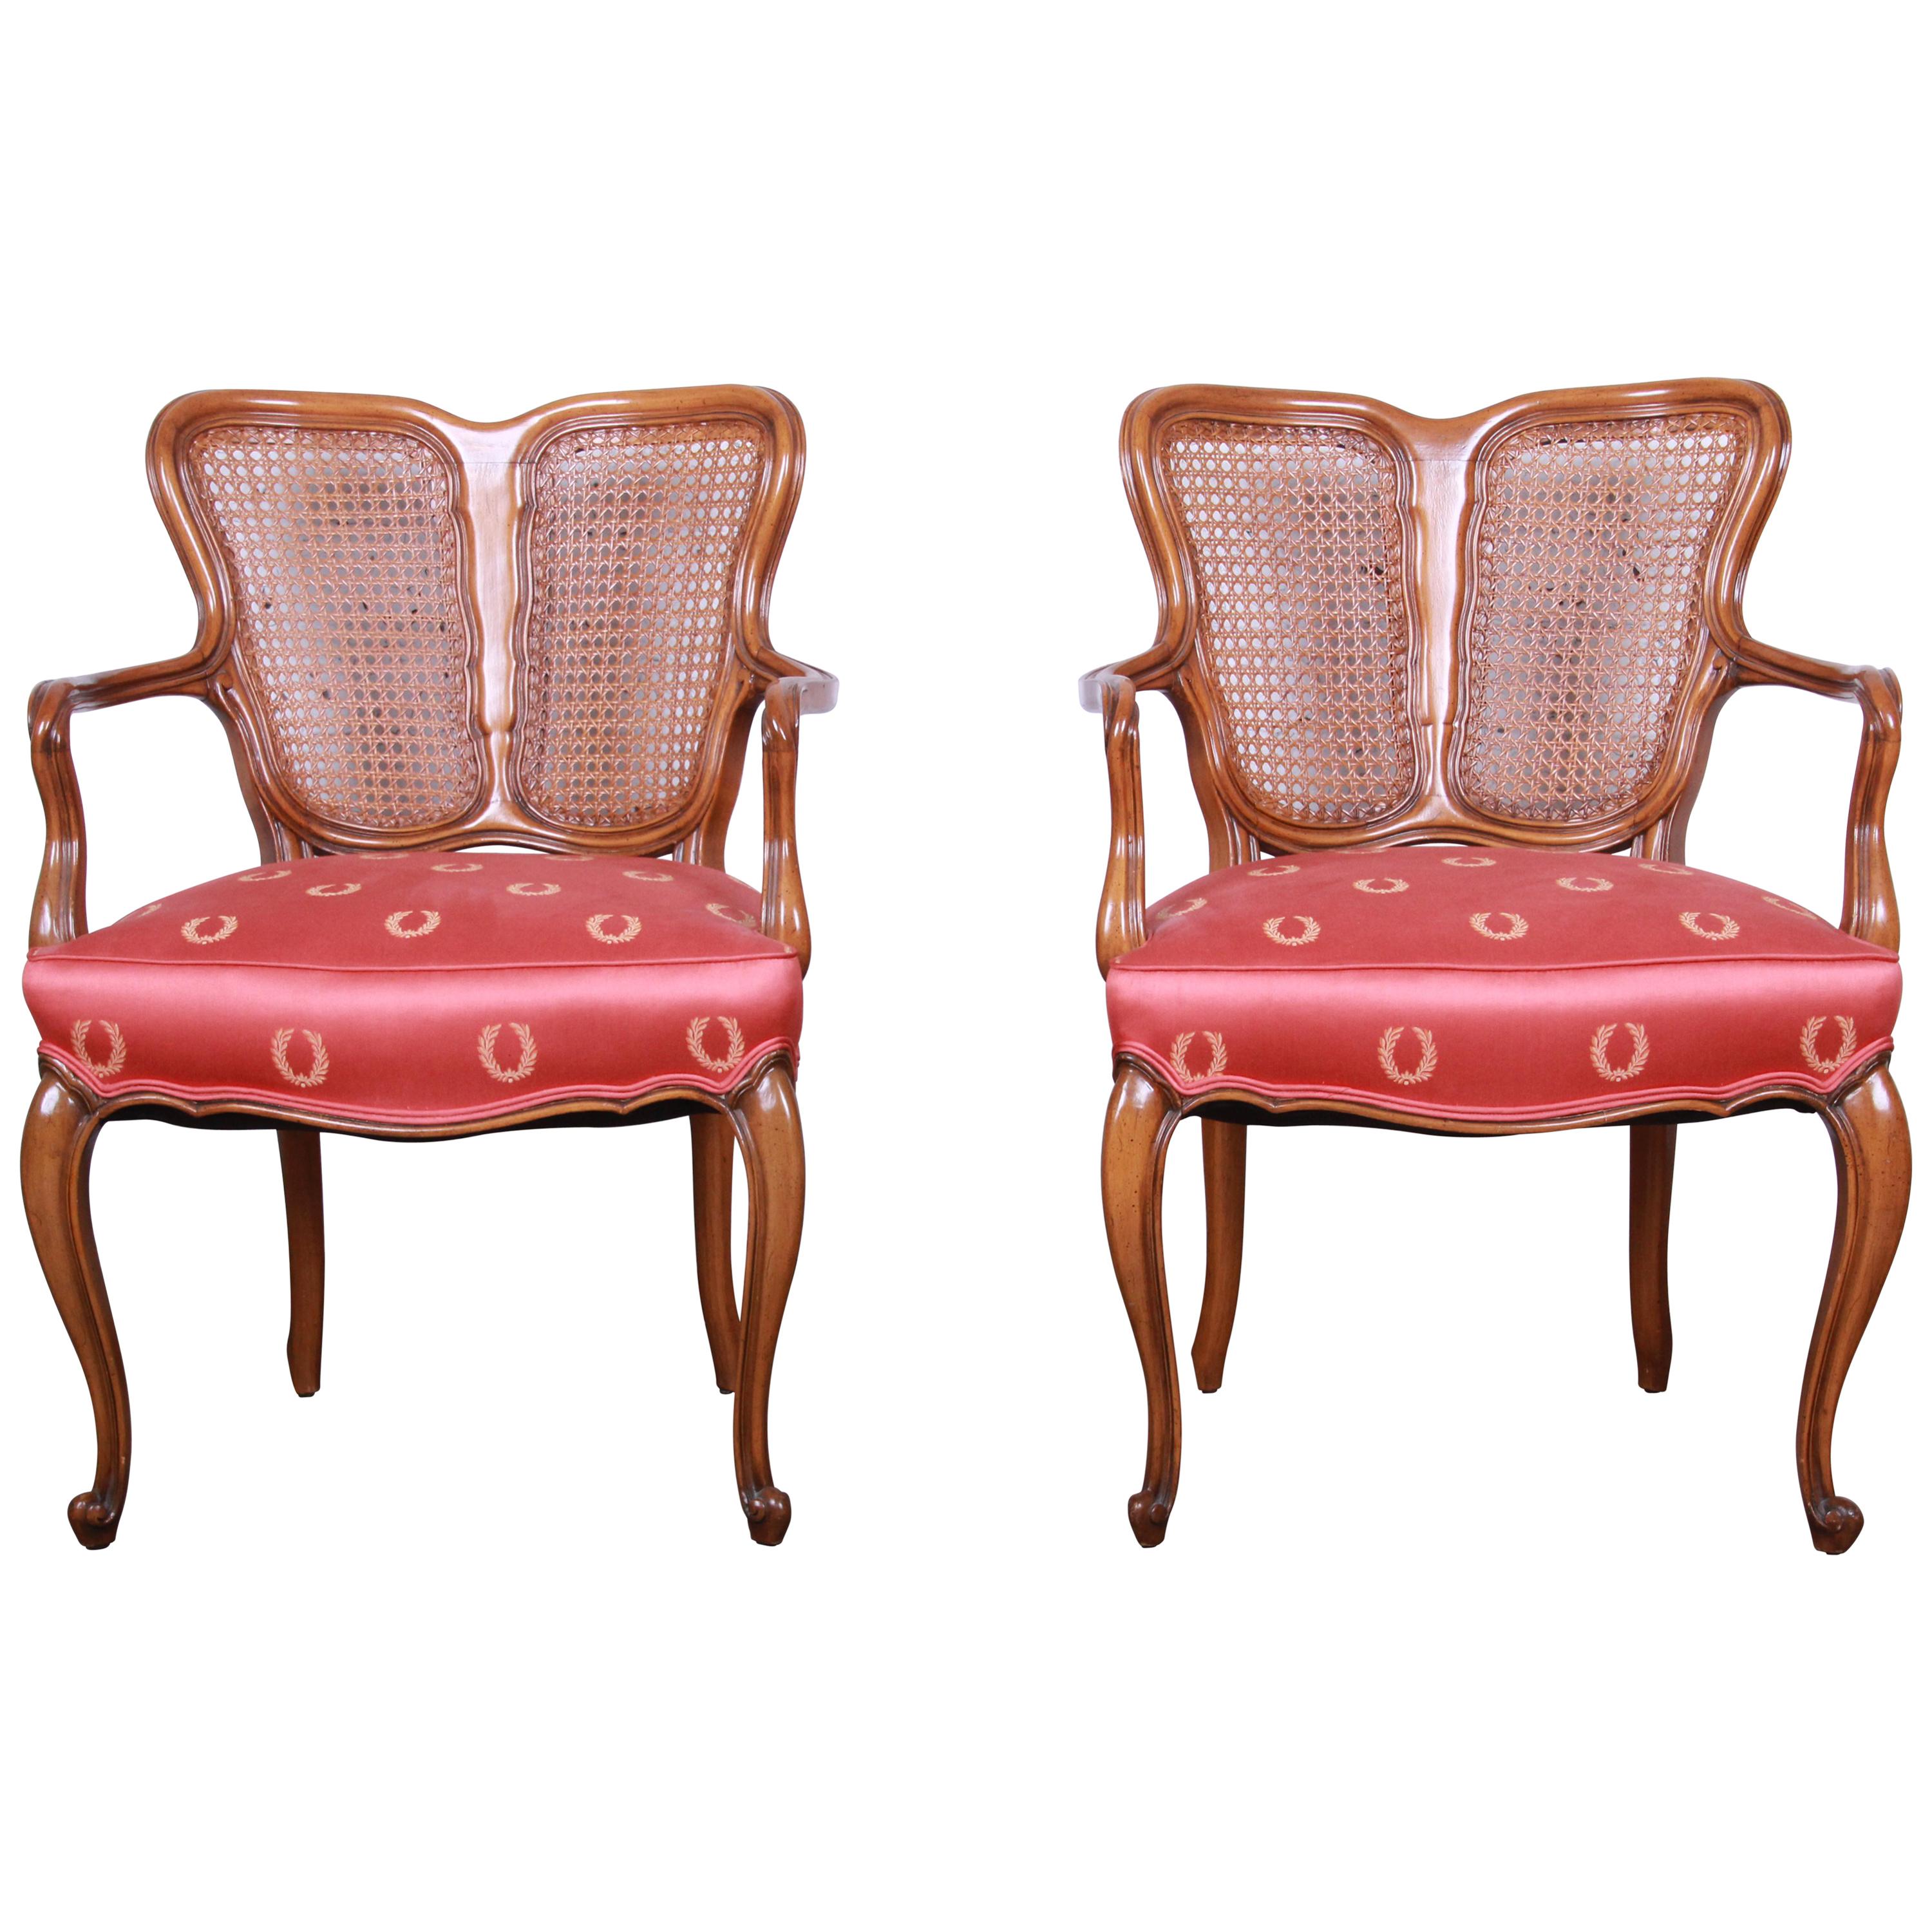 Vintage French Provincial Louis XV Style Armchairs, Pair